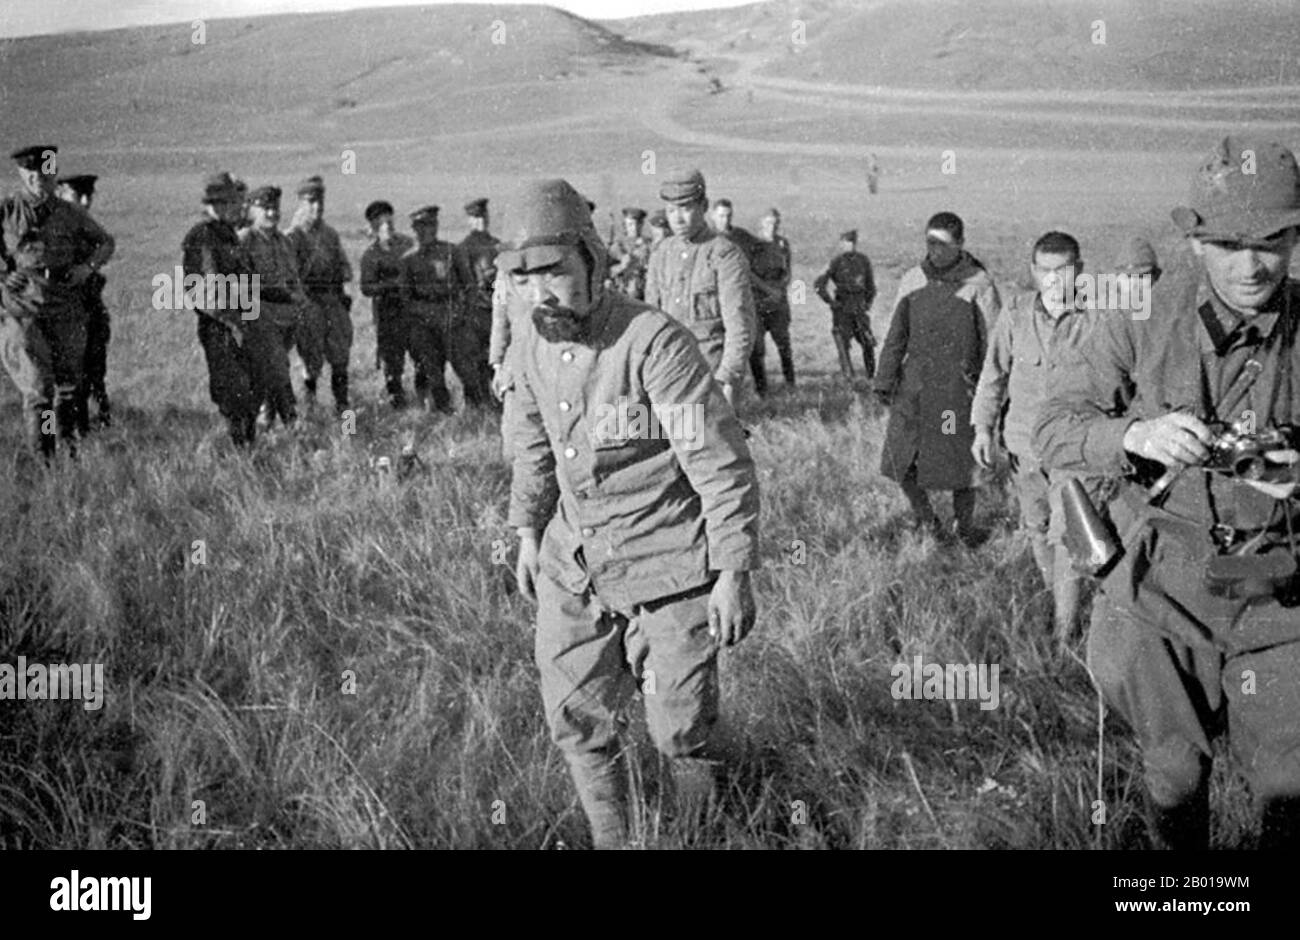 Mongolia: Captured Japanese soldiers at Khalkhin Gol. Photo by Victor Antonovich Temin (1908-1987) (out of copyright), 1939.  The Battles of Khalkhin Gol were the decisive engagements of the undeclared Soviet-Japanese Border War fought between the Soviet Union, Mongolia and Japan in 1939. They were named after the river Khalkhin Gol, which passes through the battlefield. In Japan, the decisive battle of the conflict is known as the Nomonhan Incident (Nomonhan Jiken) after a nearby village, and was a total defeat for their army. Stock Photo